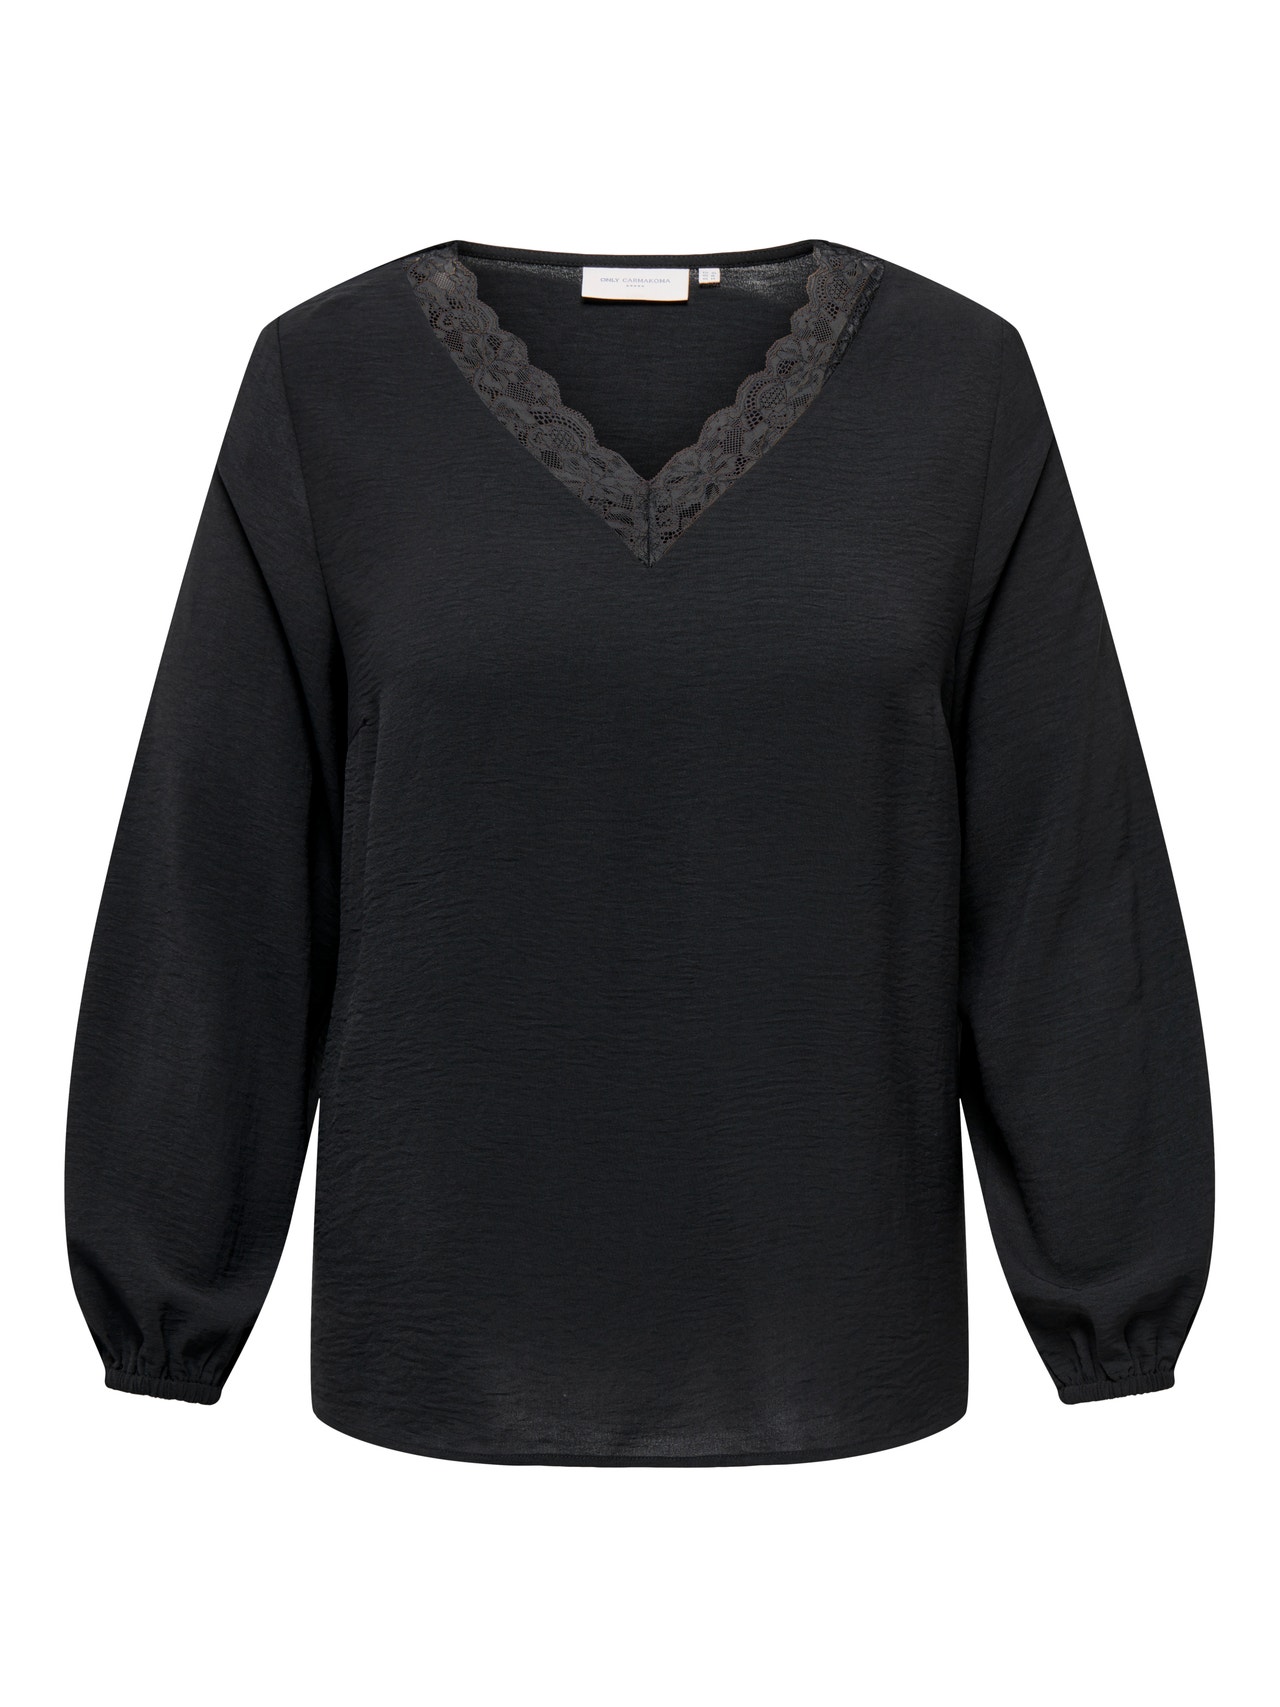 ONLY Curvy long sleeve top -Black - 15289152